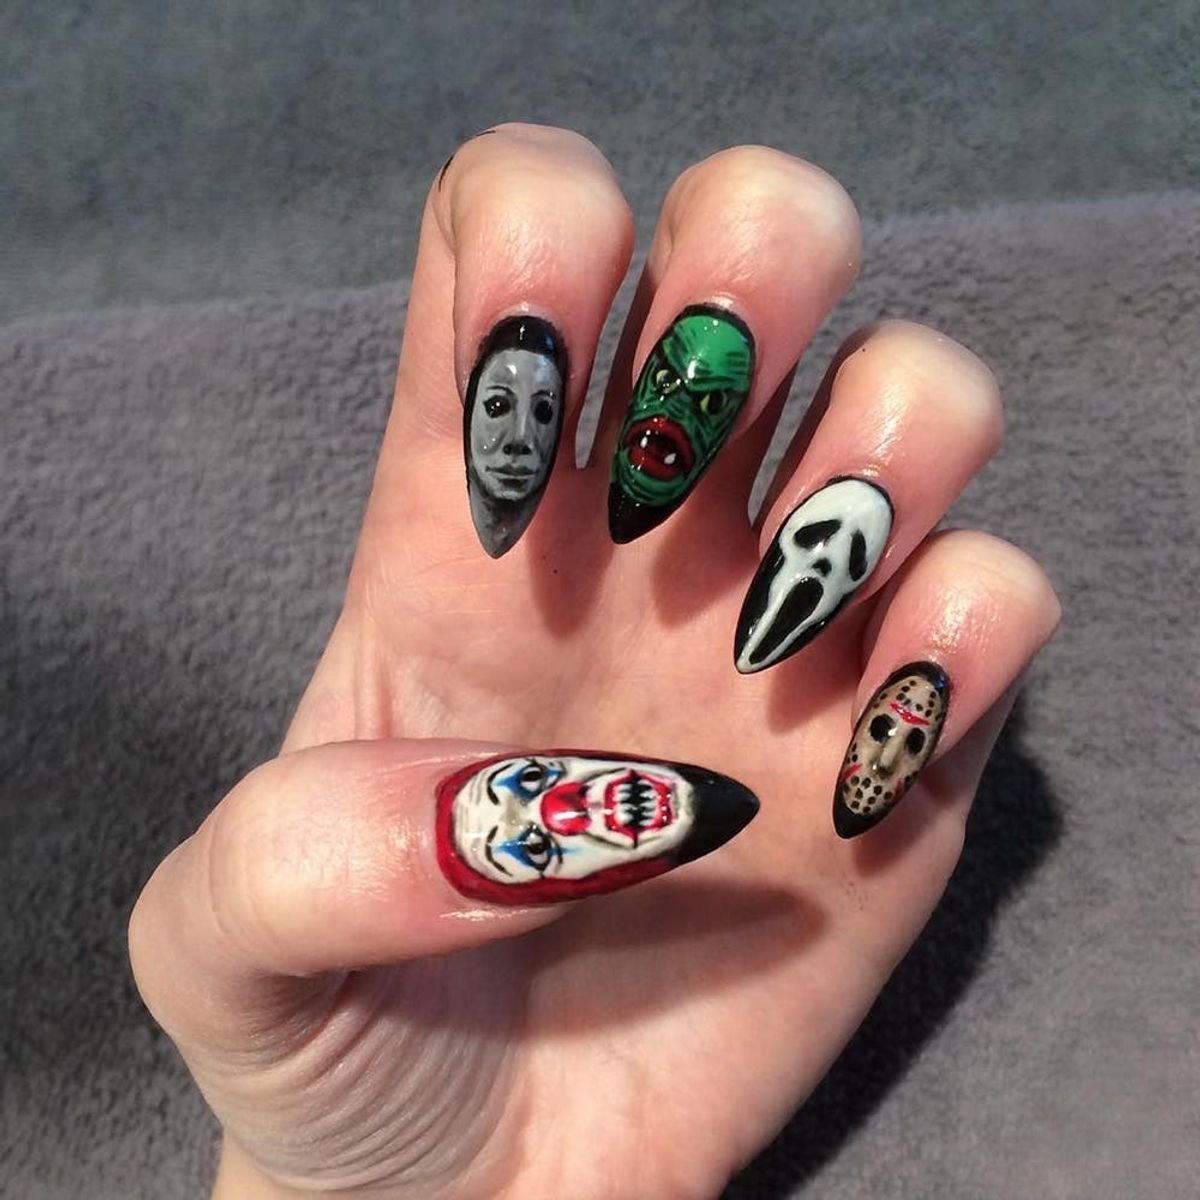 15 Over the Top Halloween Nail Designs for Die-Hard Halloween Fans